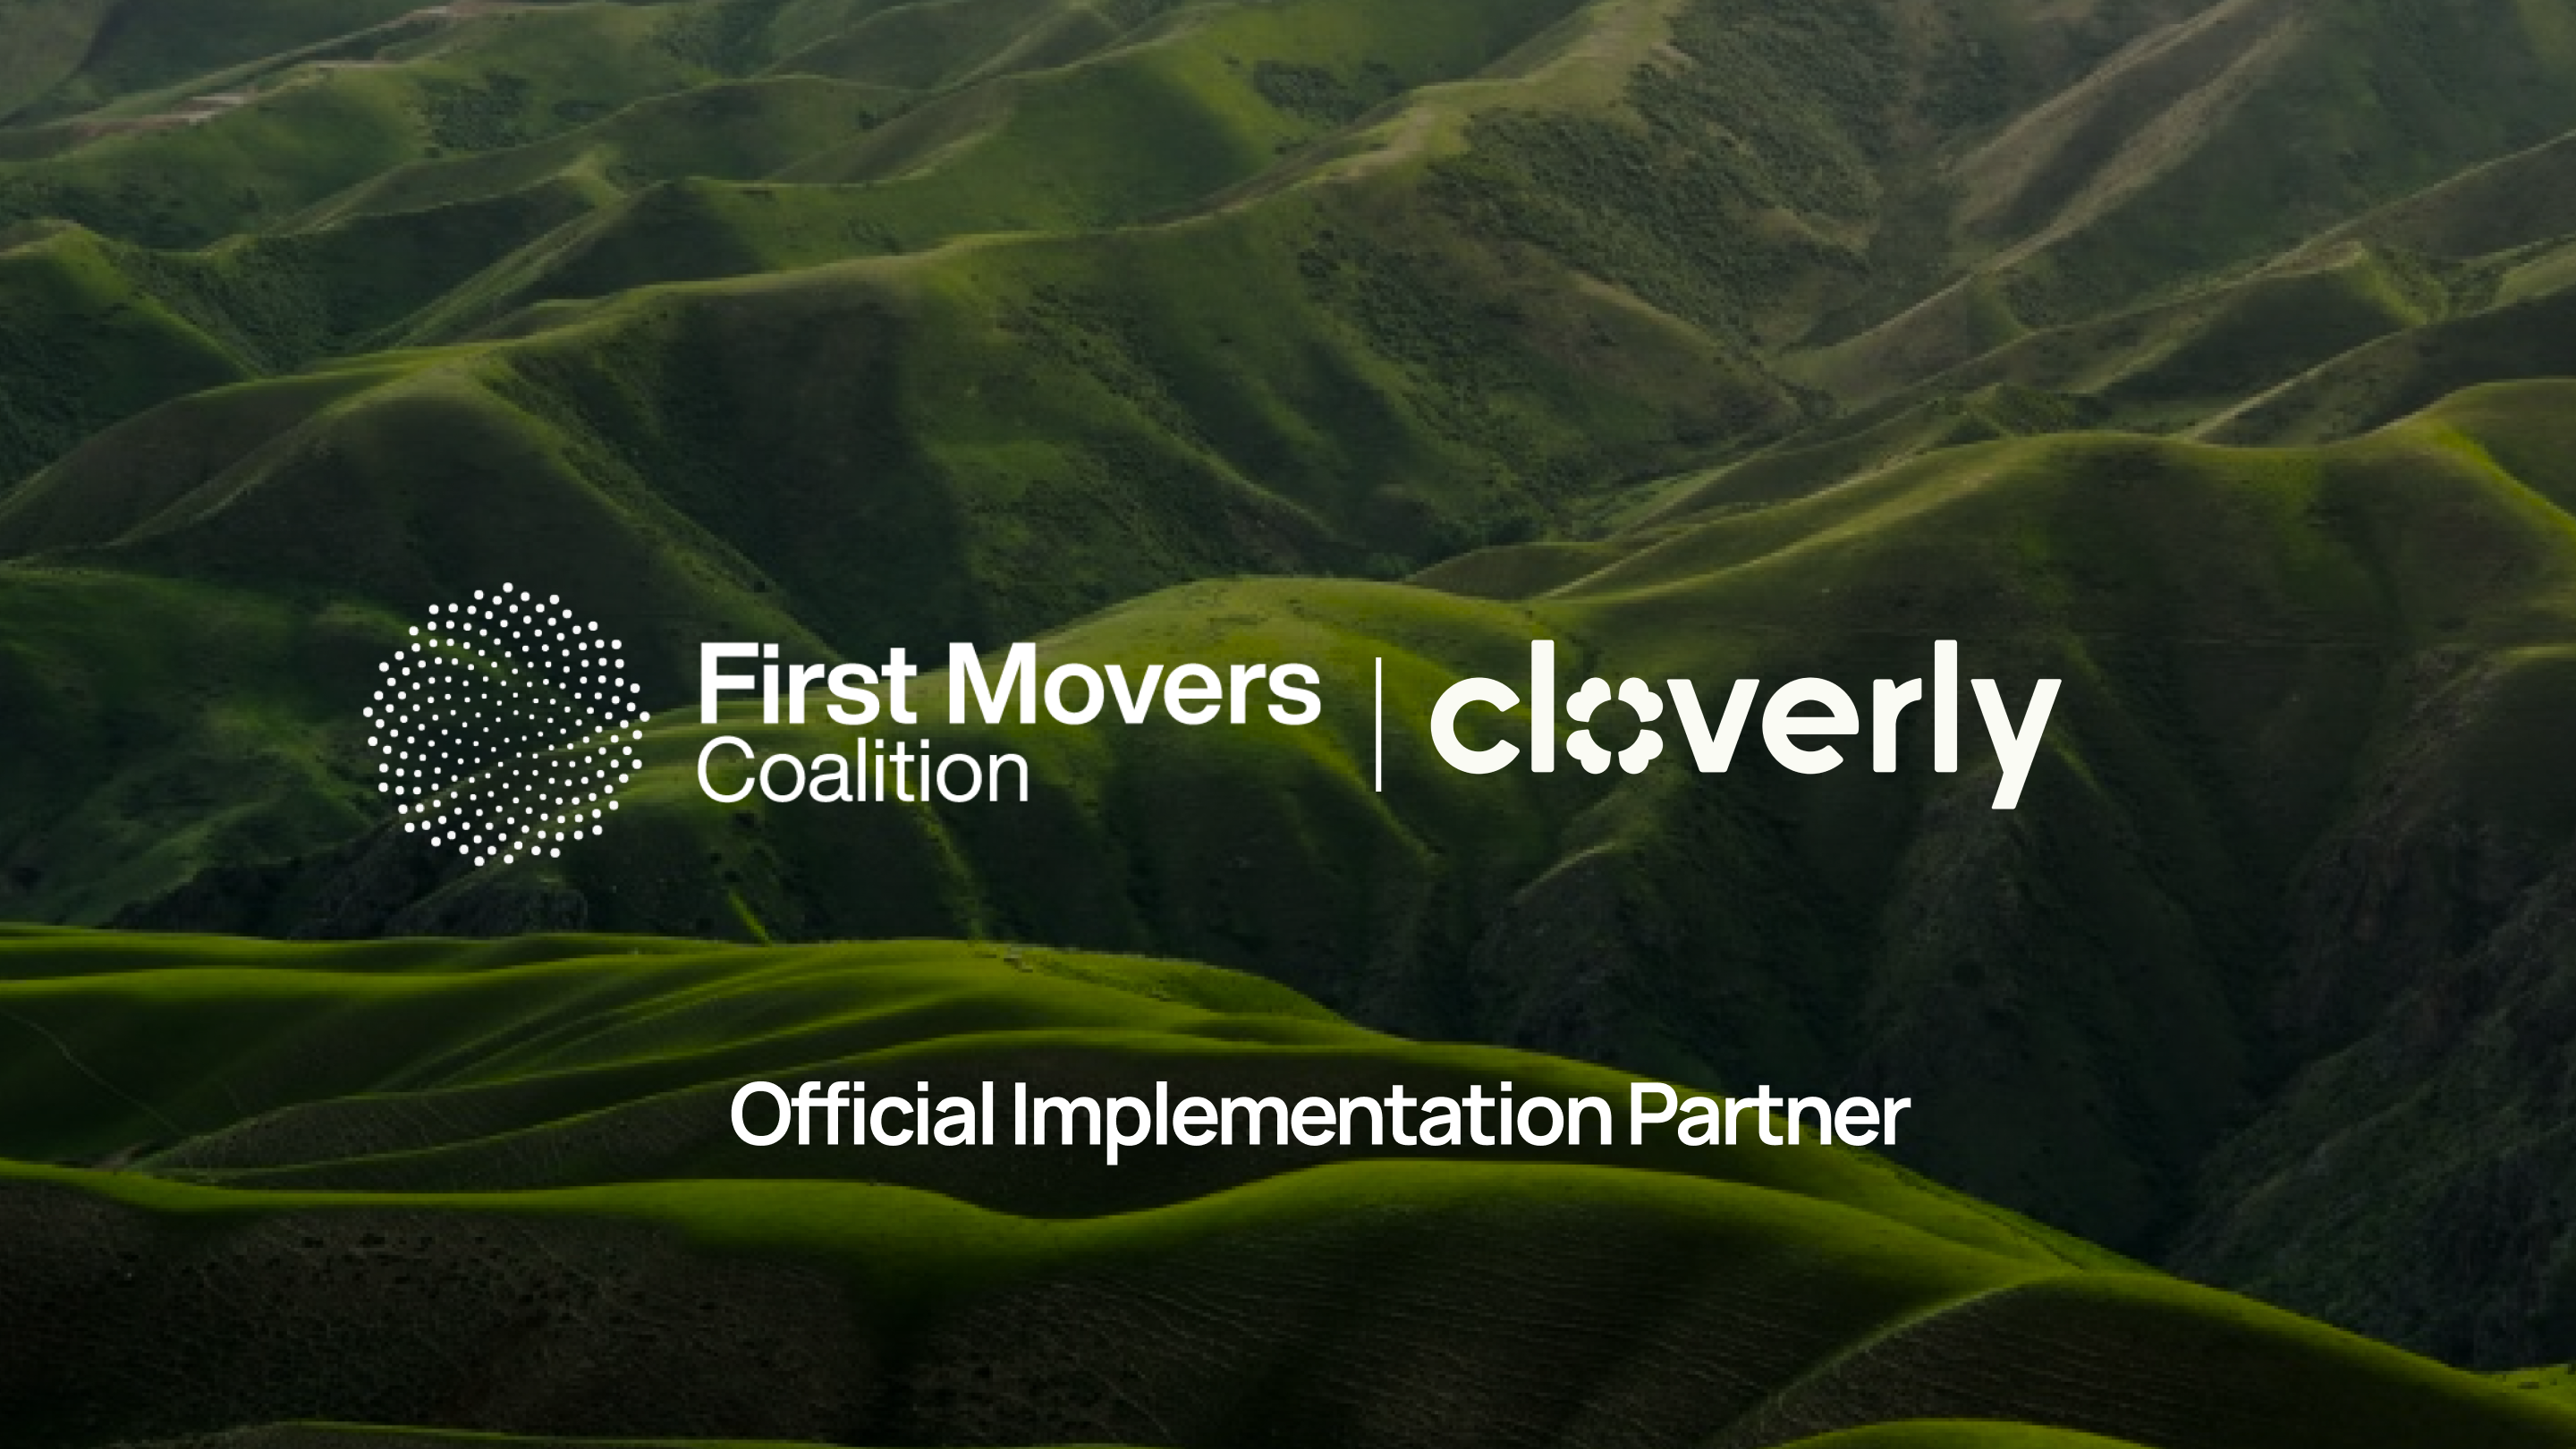 First Movers Coalition Cloverly